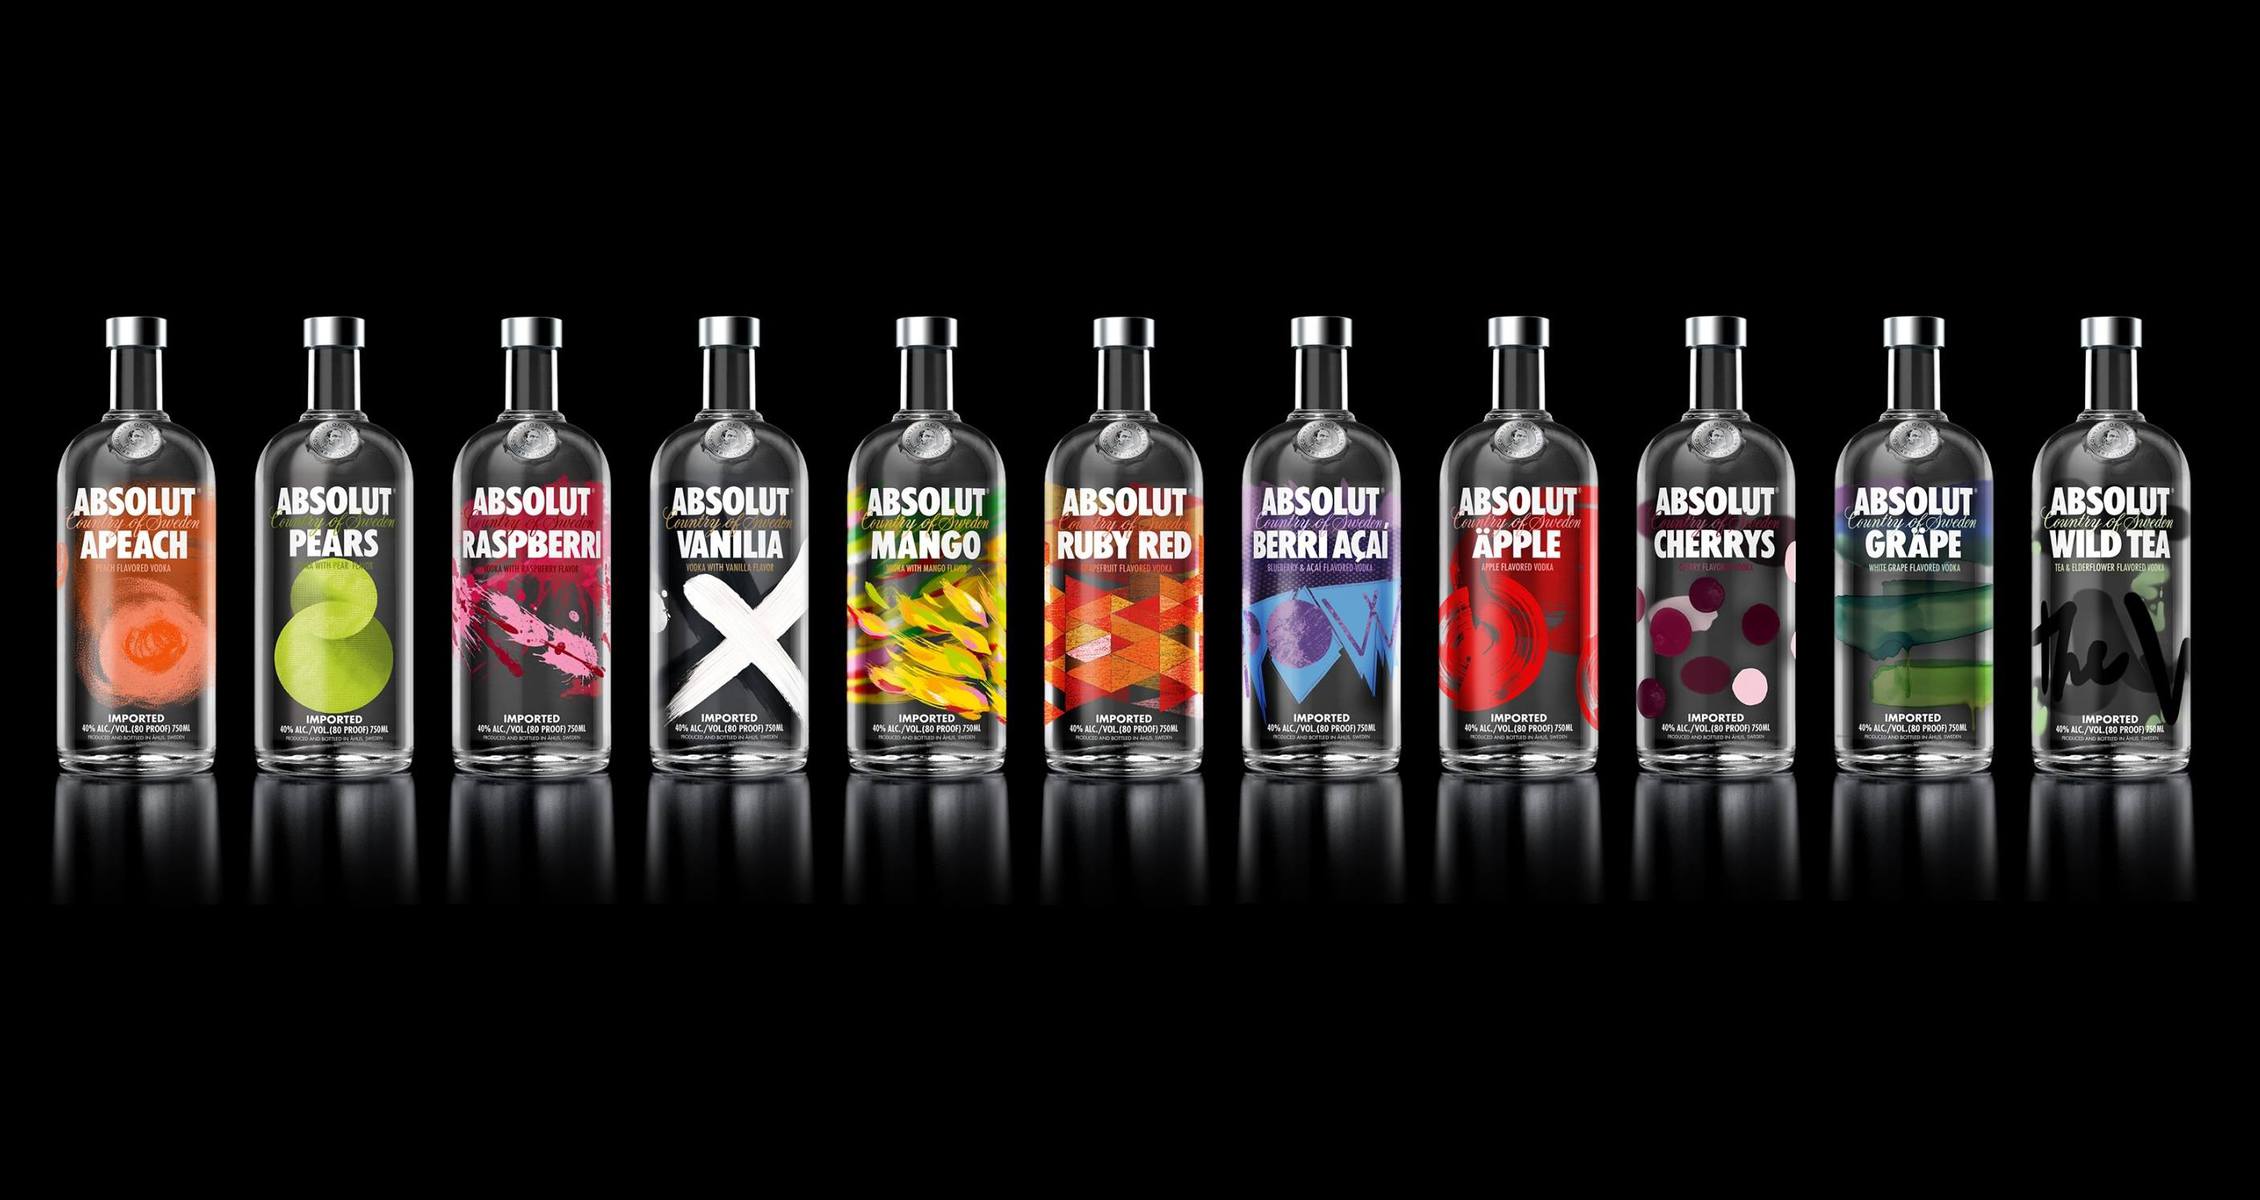 Marketing Mix Of Absolut Vodka The 4 P s Of Absolut Vodka